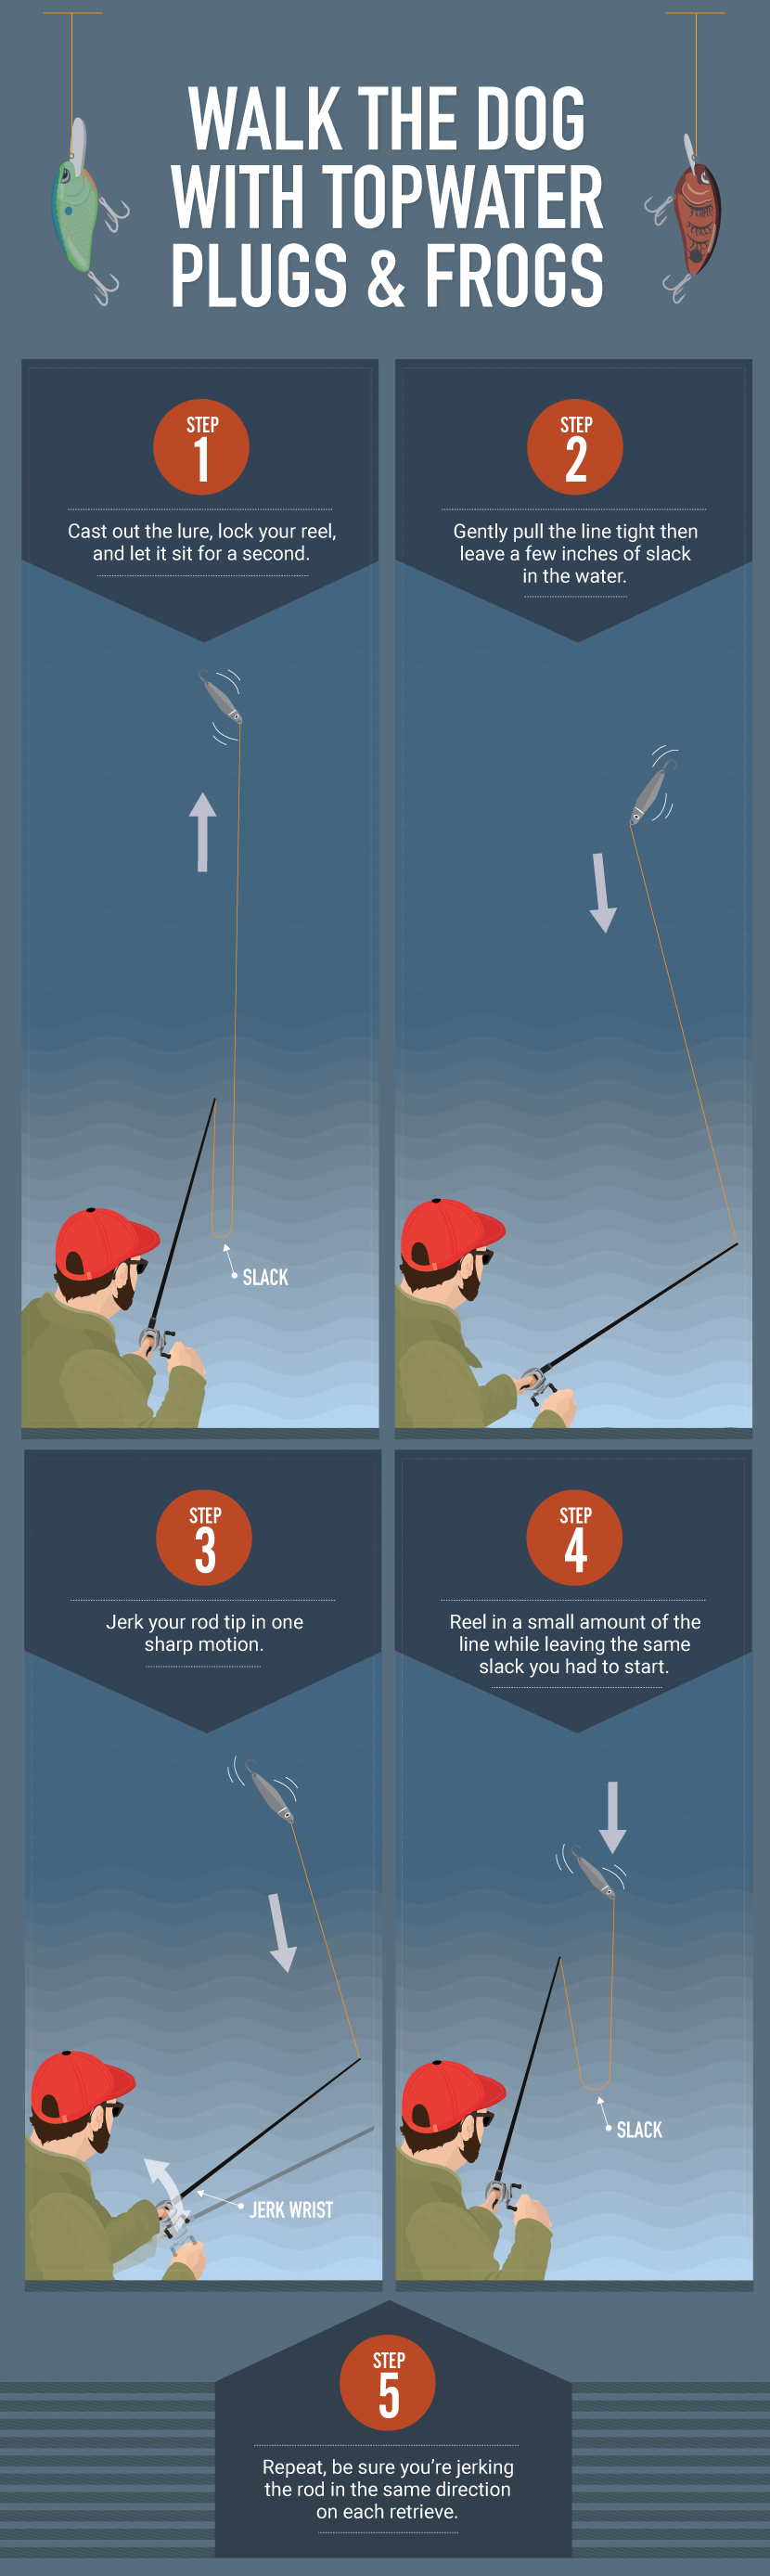 Cast and Retrieve Fishing: Steps and Techniques